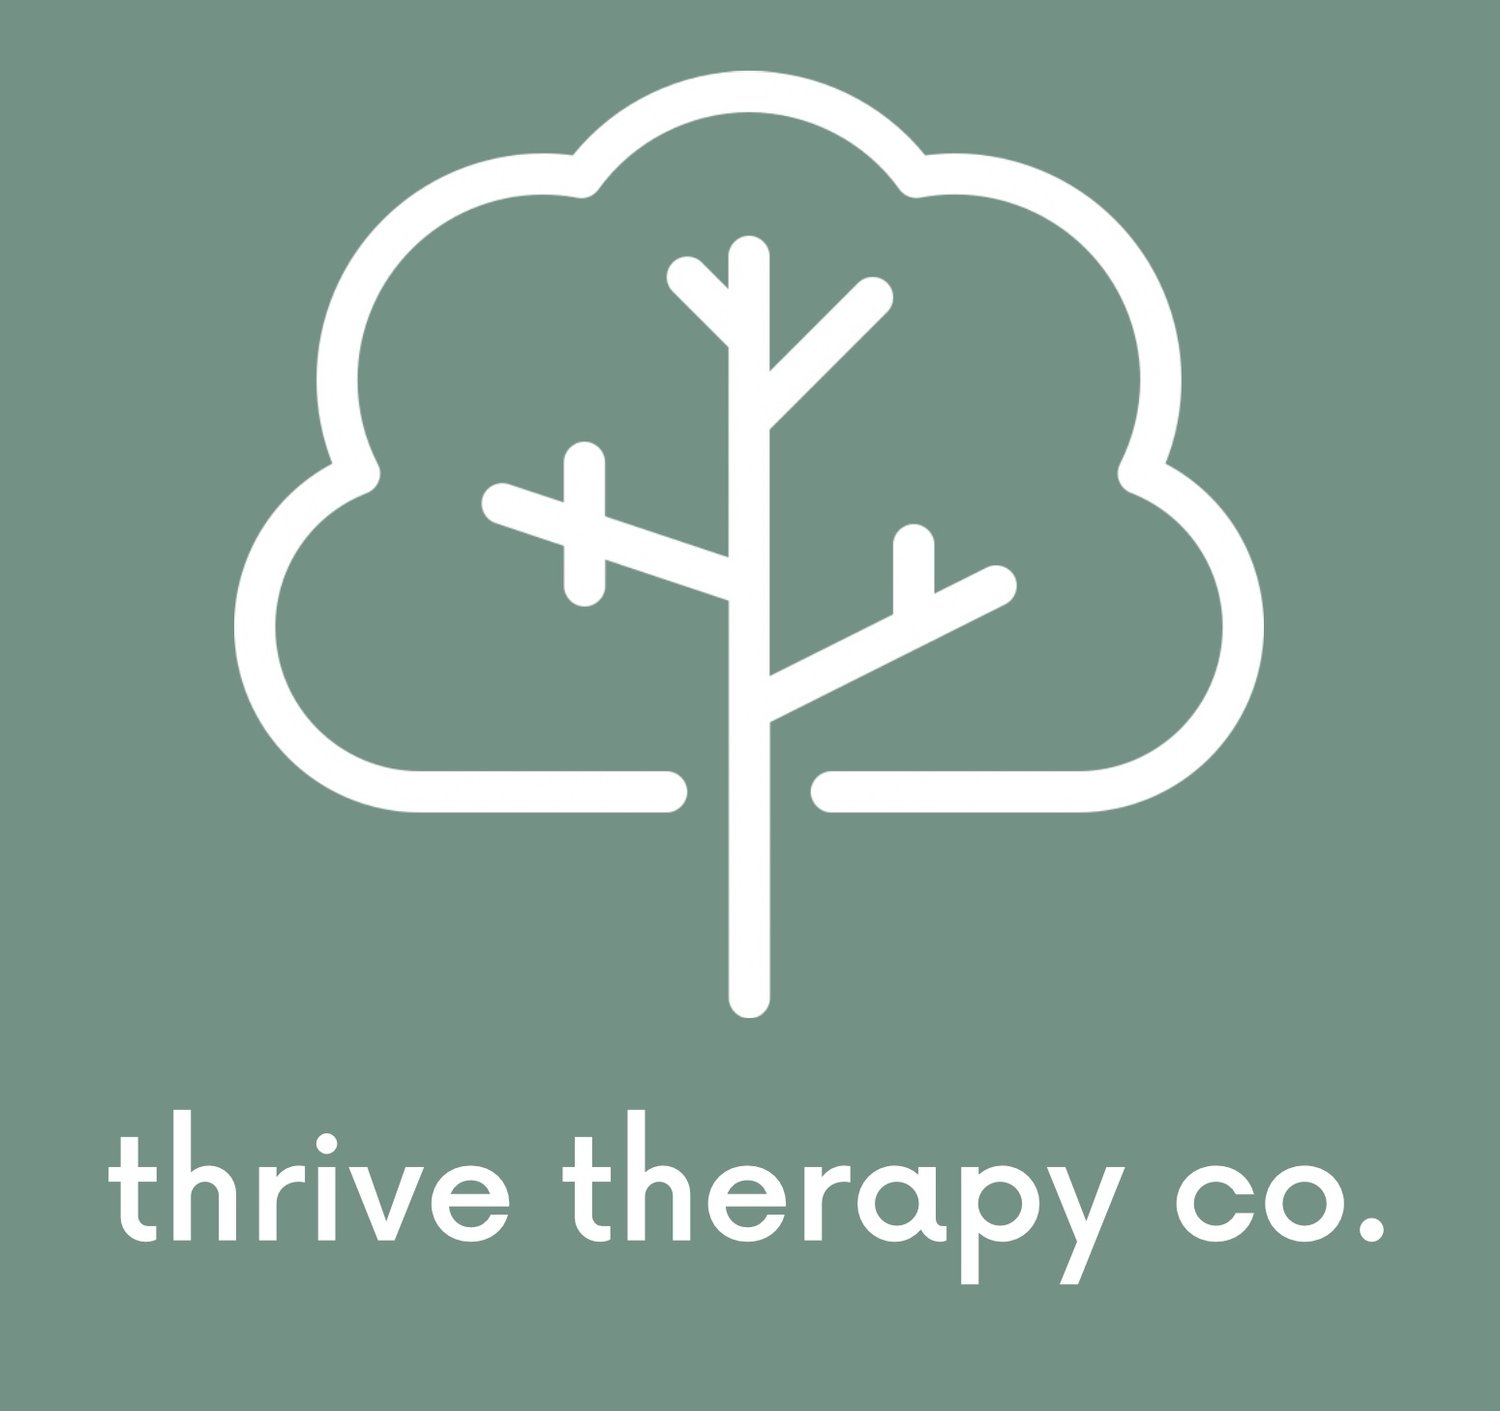 Thrive Therapy Co.